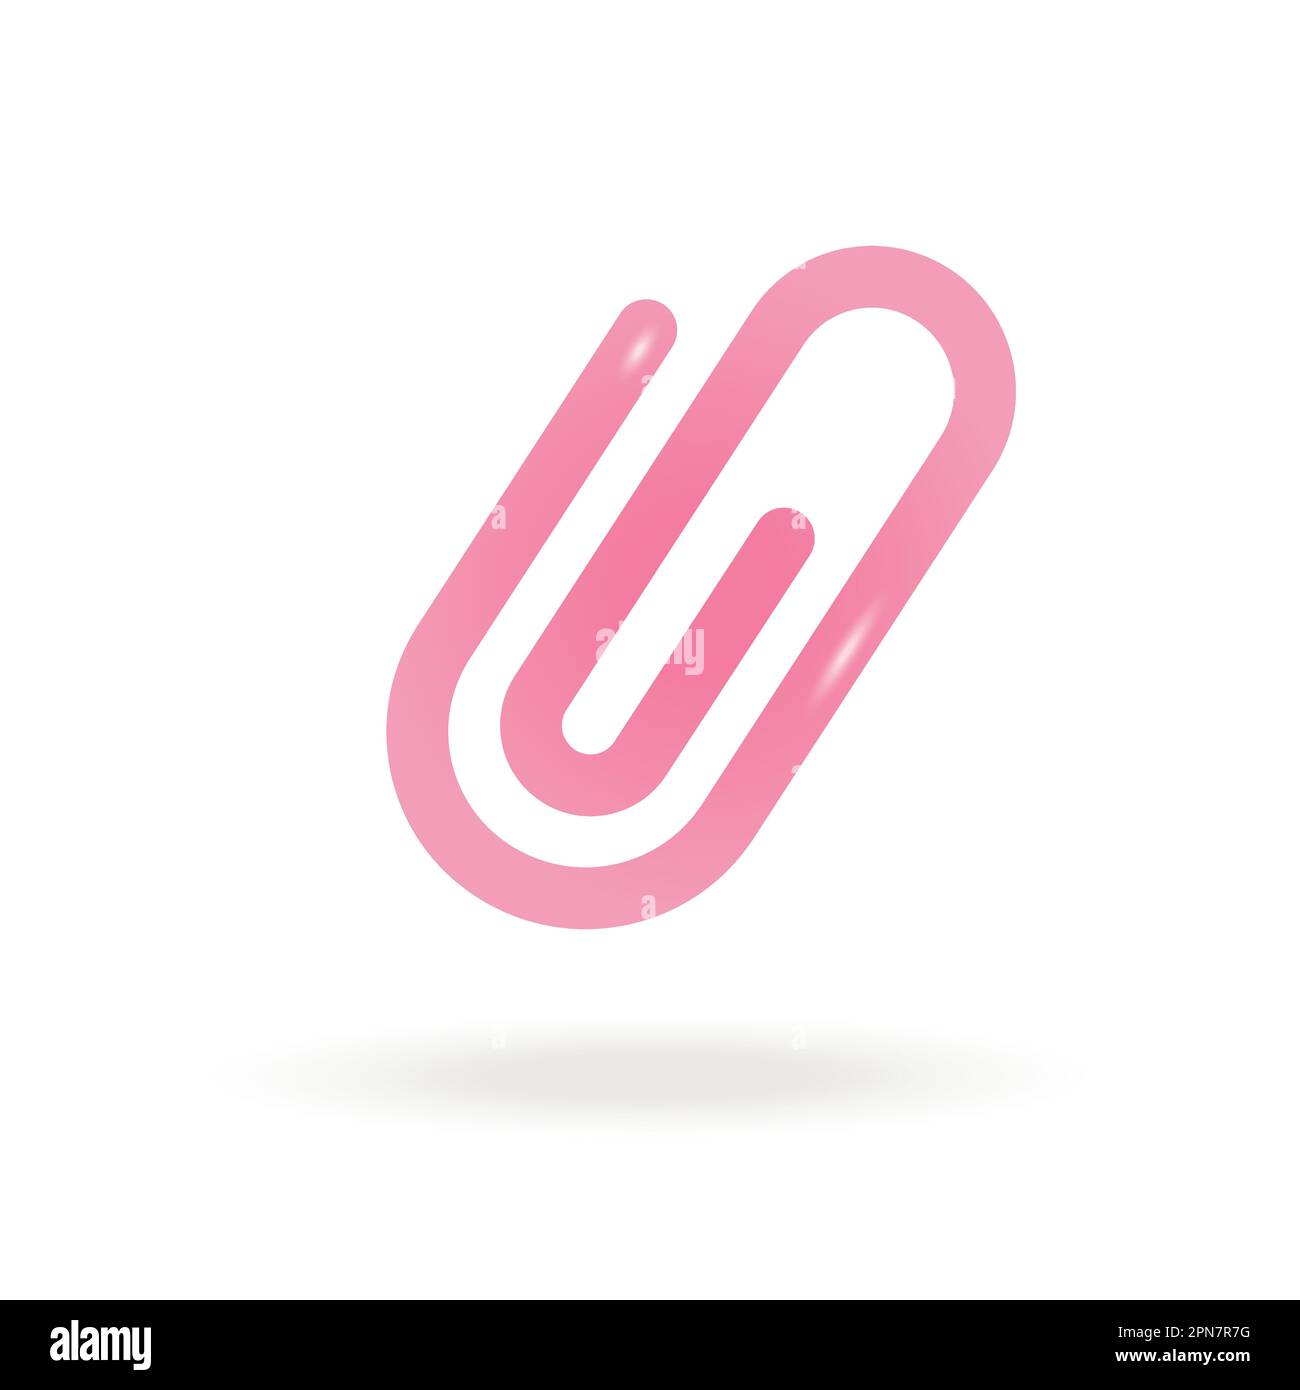 Shiny pink paperclip for papers or documents 3D icon Stock Vector